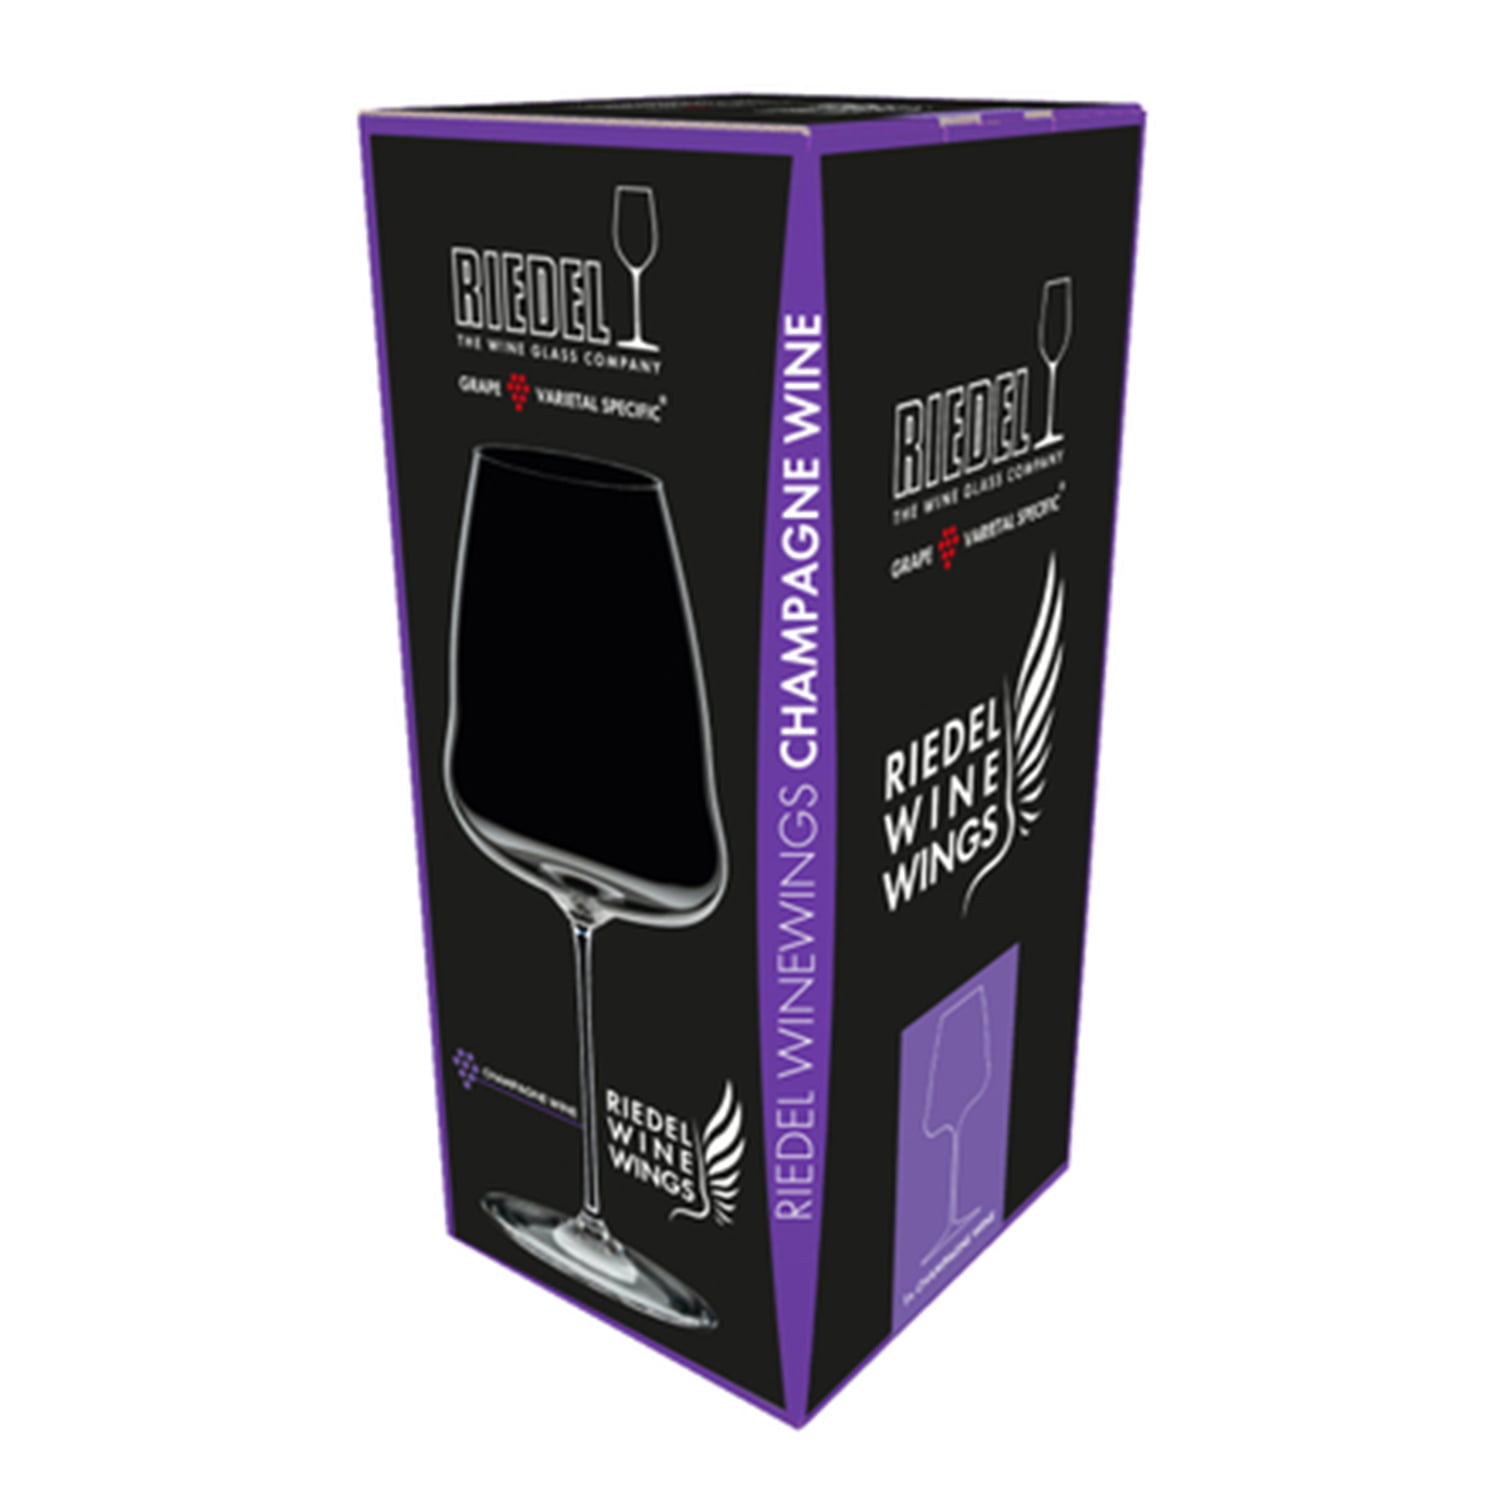 Riedel Winewings Riesling / Champagne Stemless Wine Glasses - Set of 2 -  Loft410